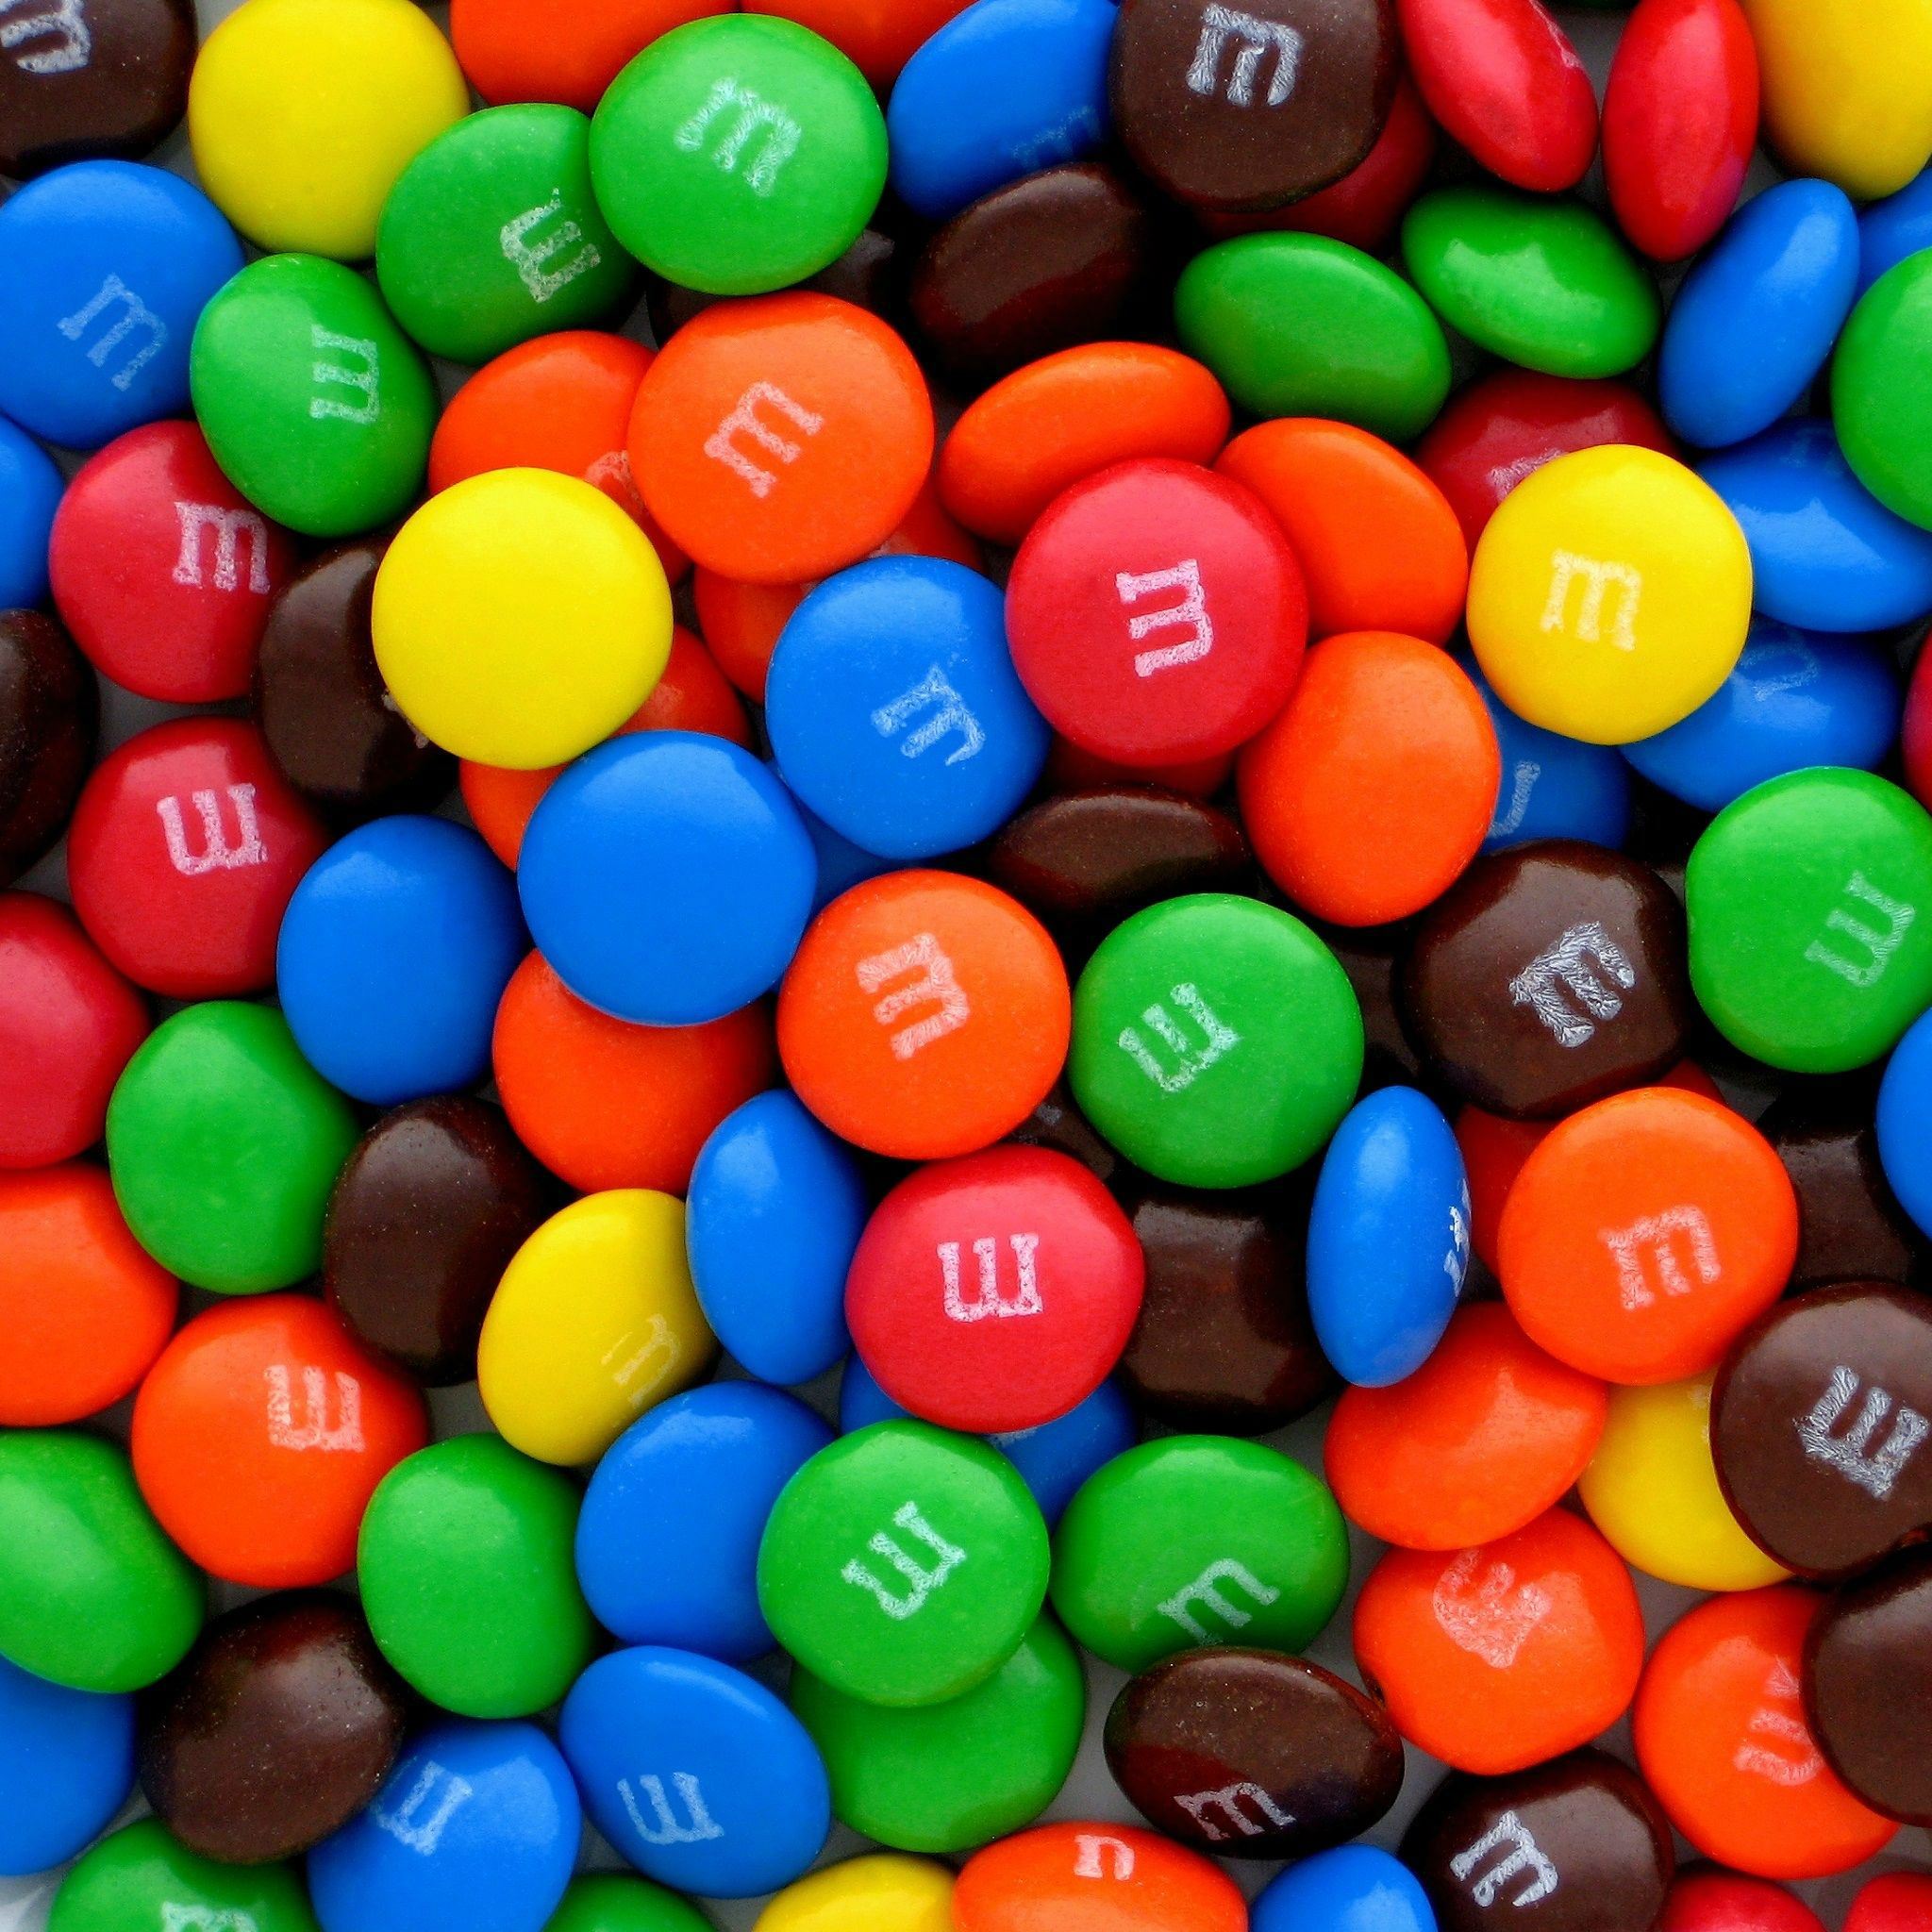 Colorful M&Ms Candy Pills Overlap iPad Air wallpaper 